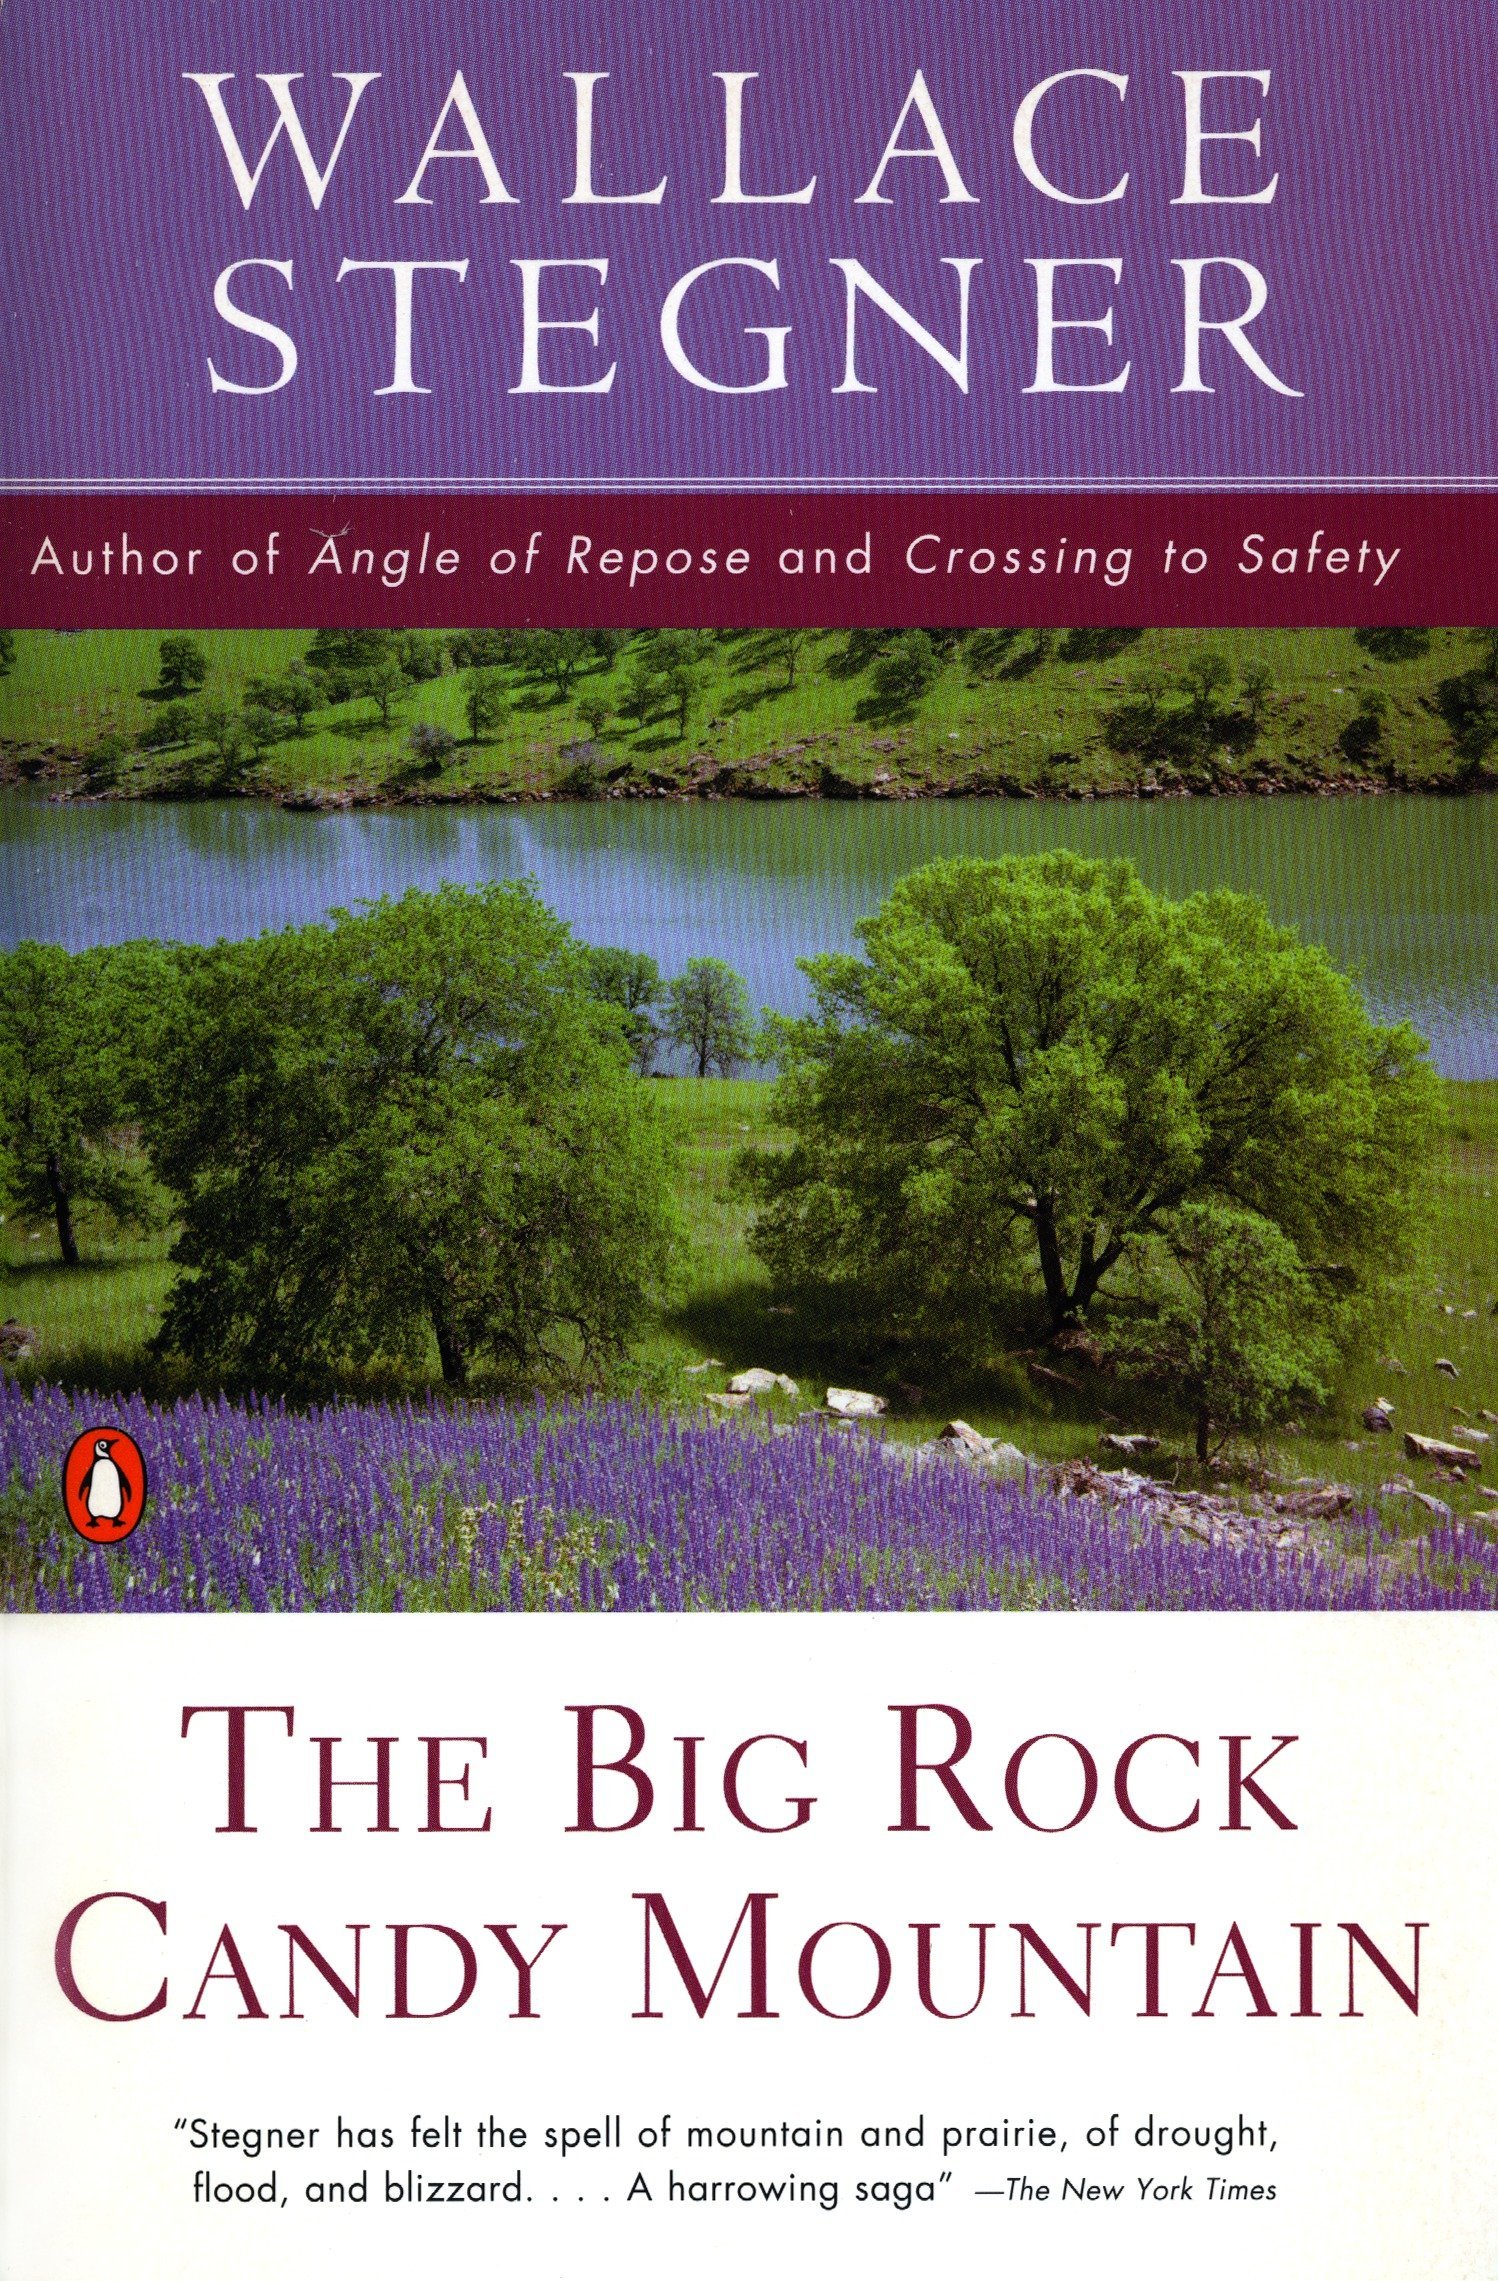 “The Big Rock Candy Mountain” by Wallace Stegner 